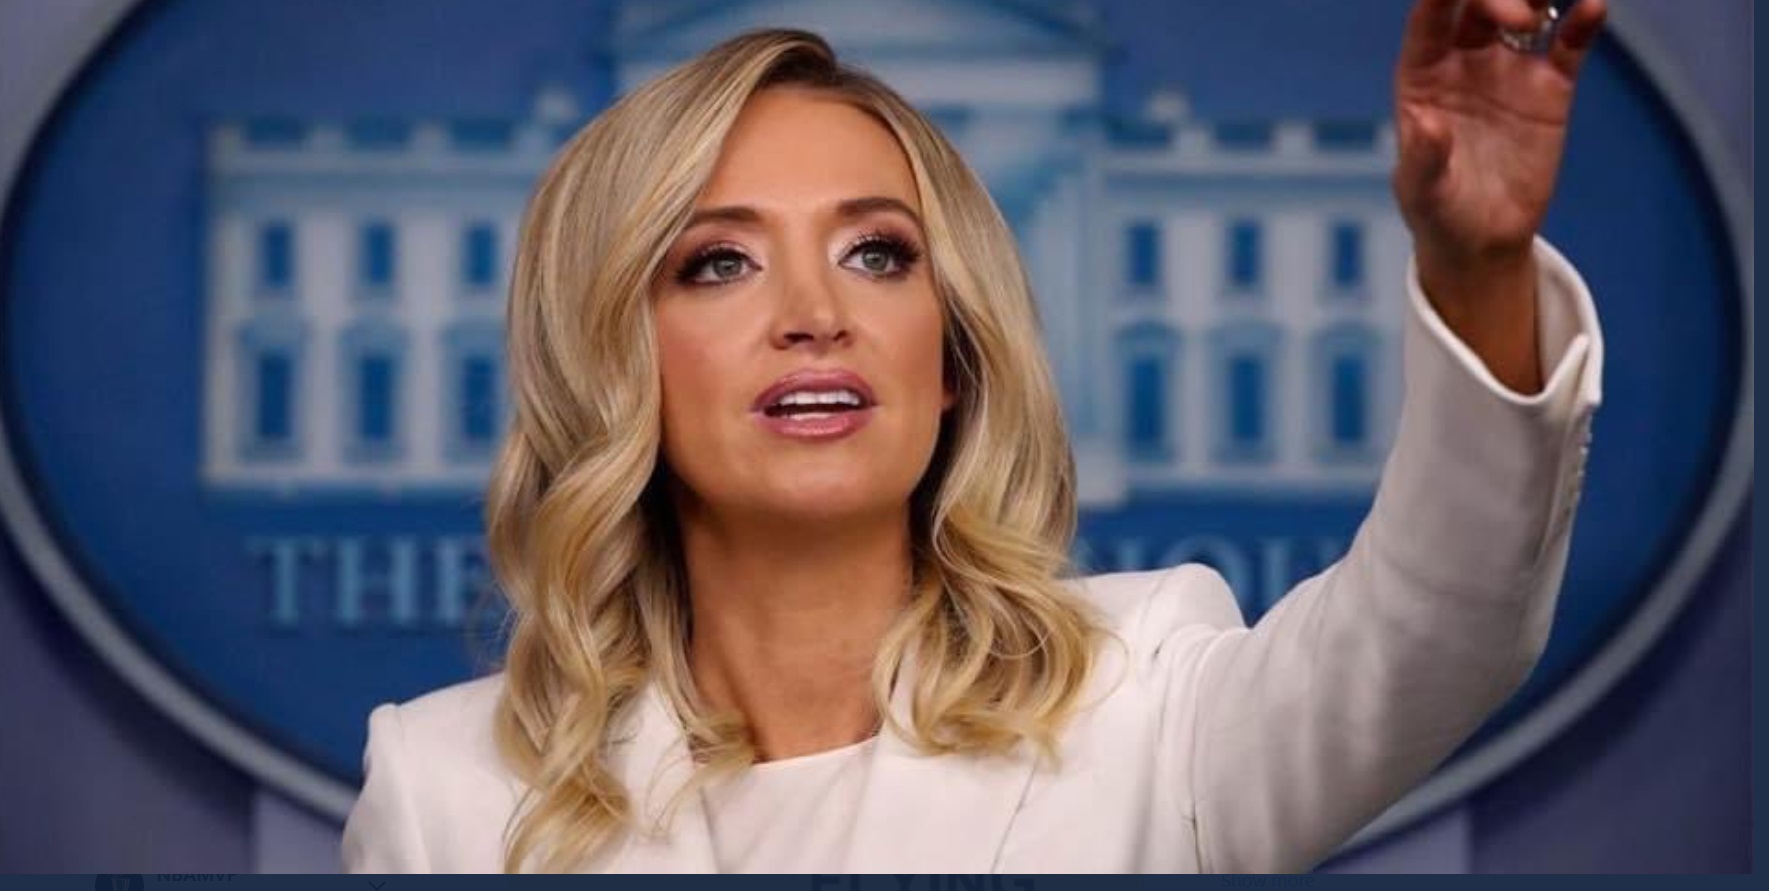 PHOTO Kayleigh McEnany Making Gaslighting Sign With Her Hand